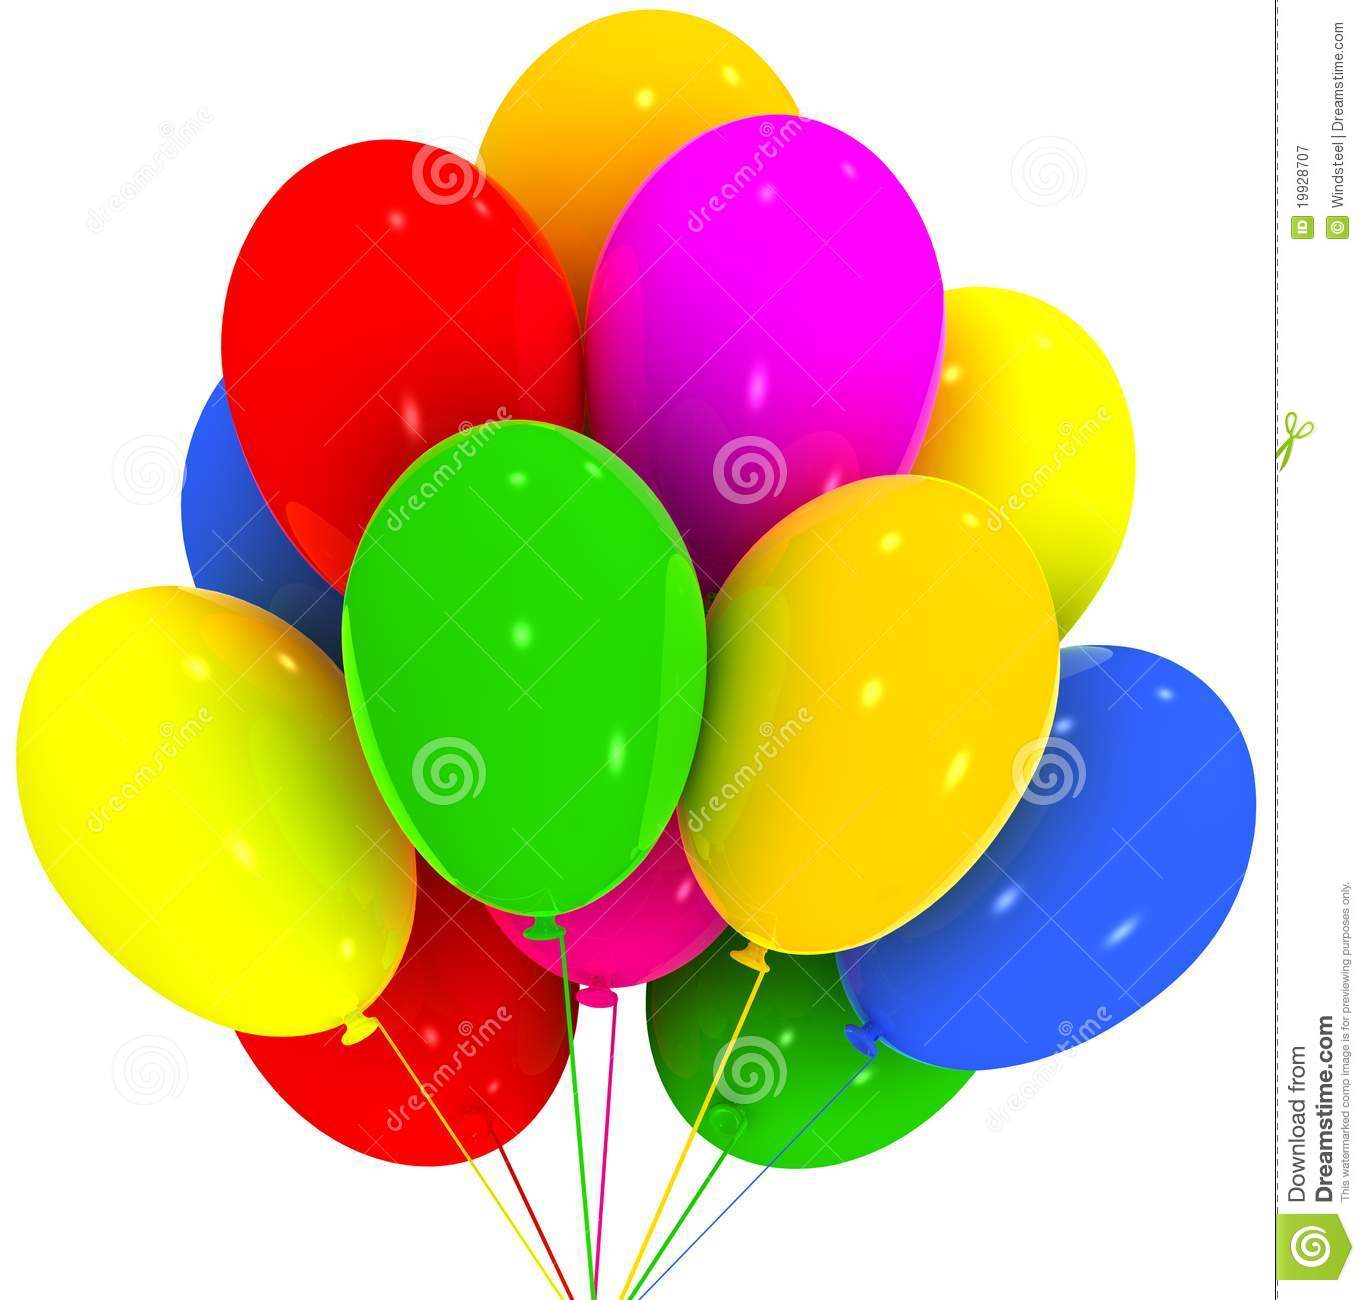 Birthday And Party Decoration Royalty Free Stock Balloons Birthday